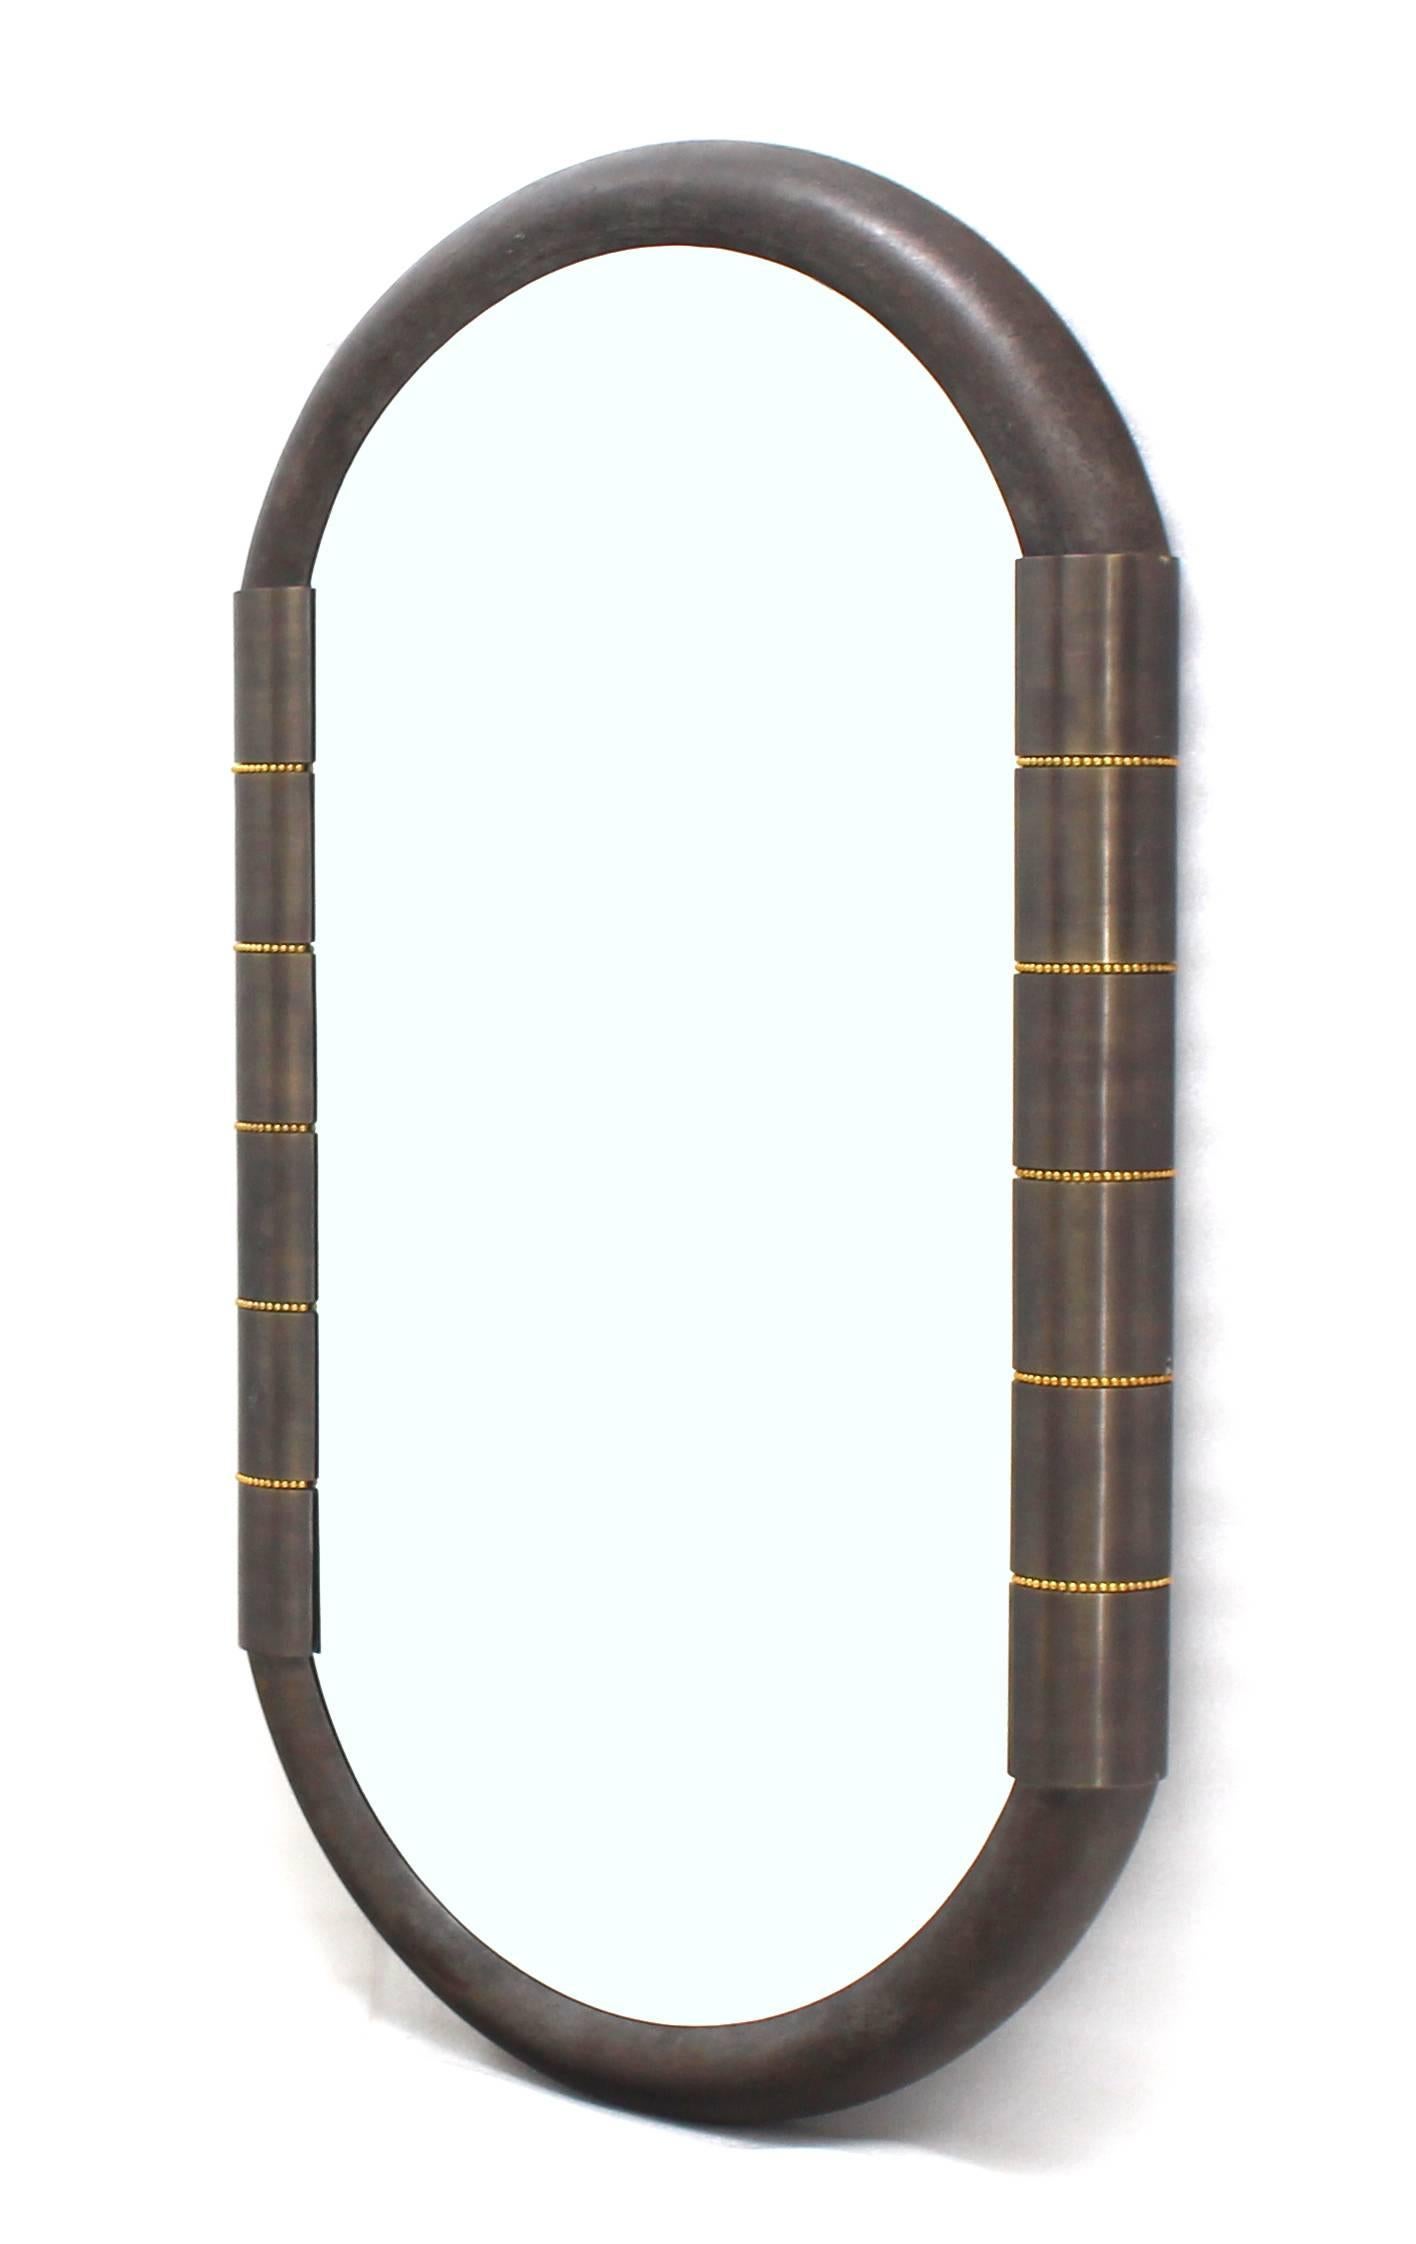 Forged metal Mid Century Modern racetrack shape metal and bronze frame mirror.